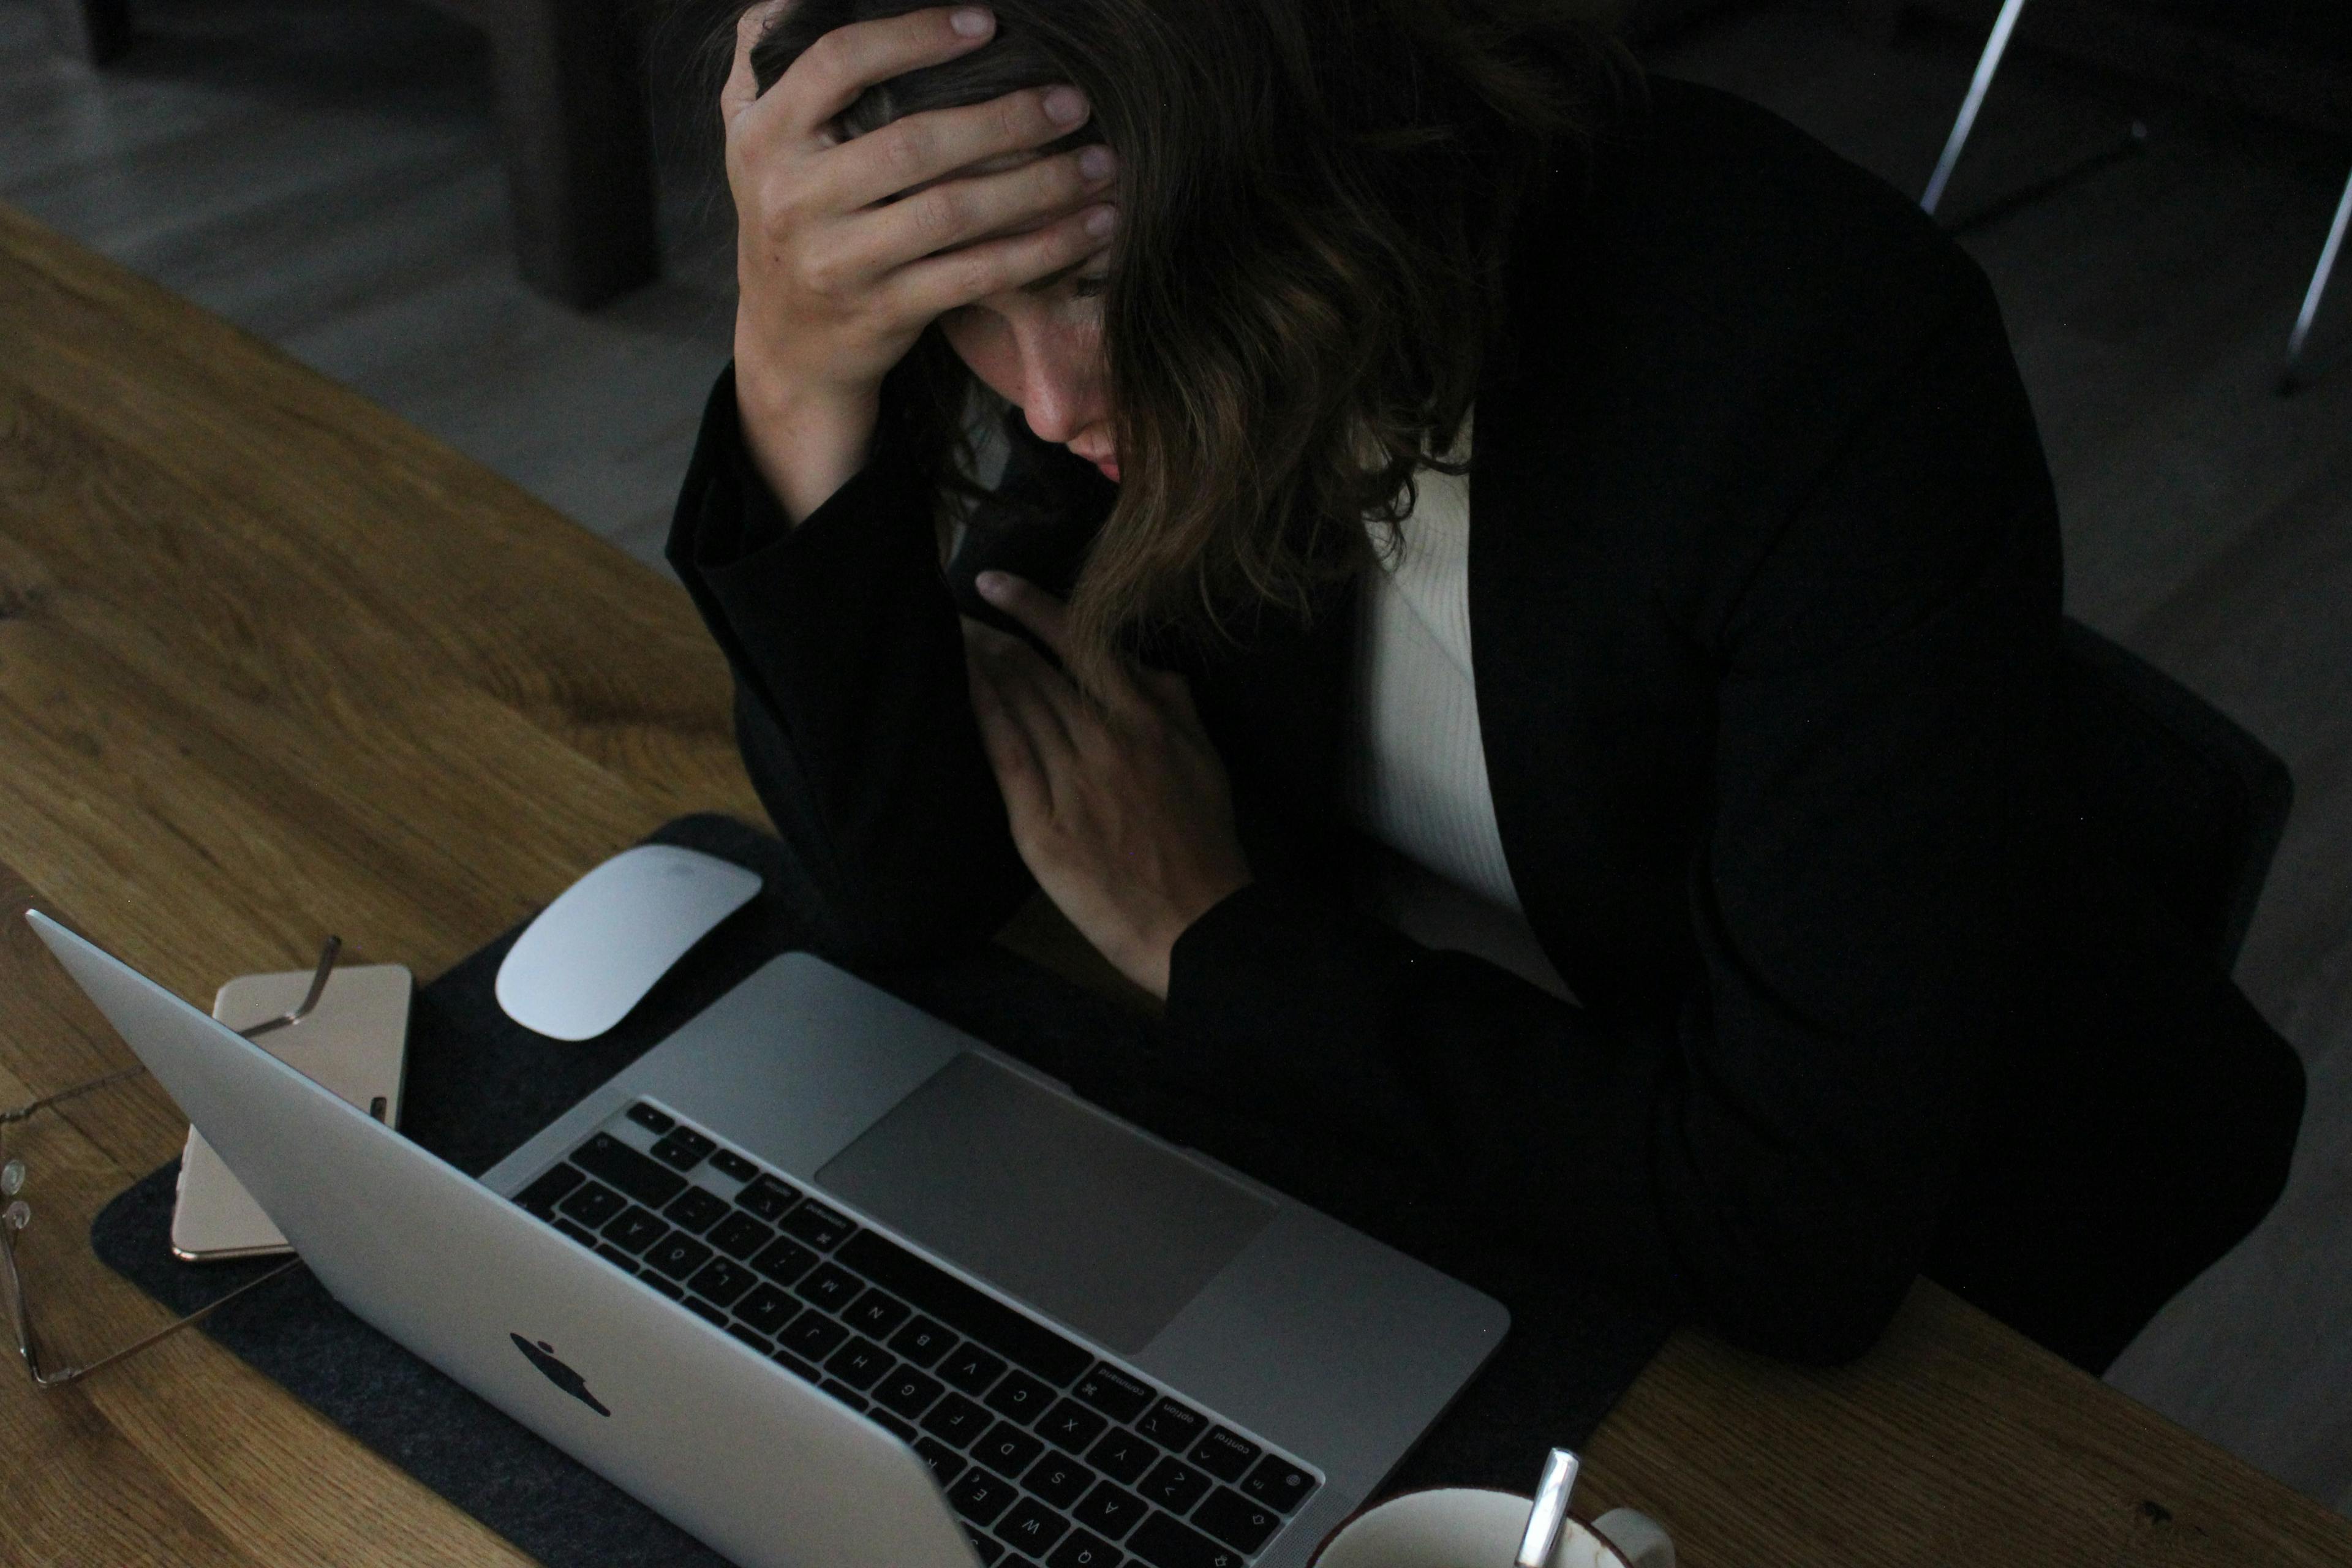 Distressed woman in front of laptop